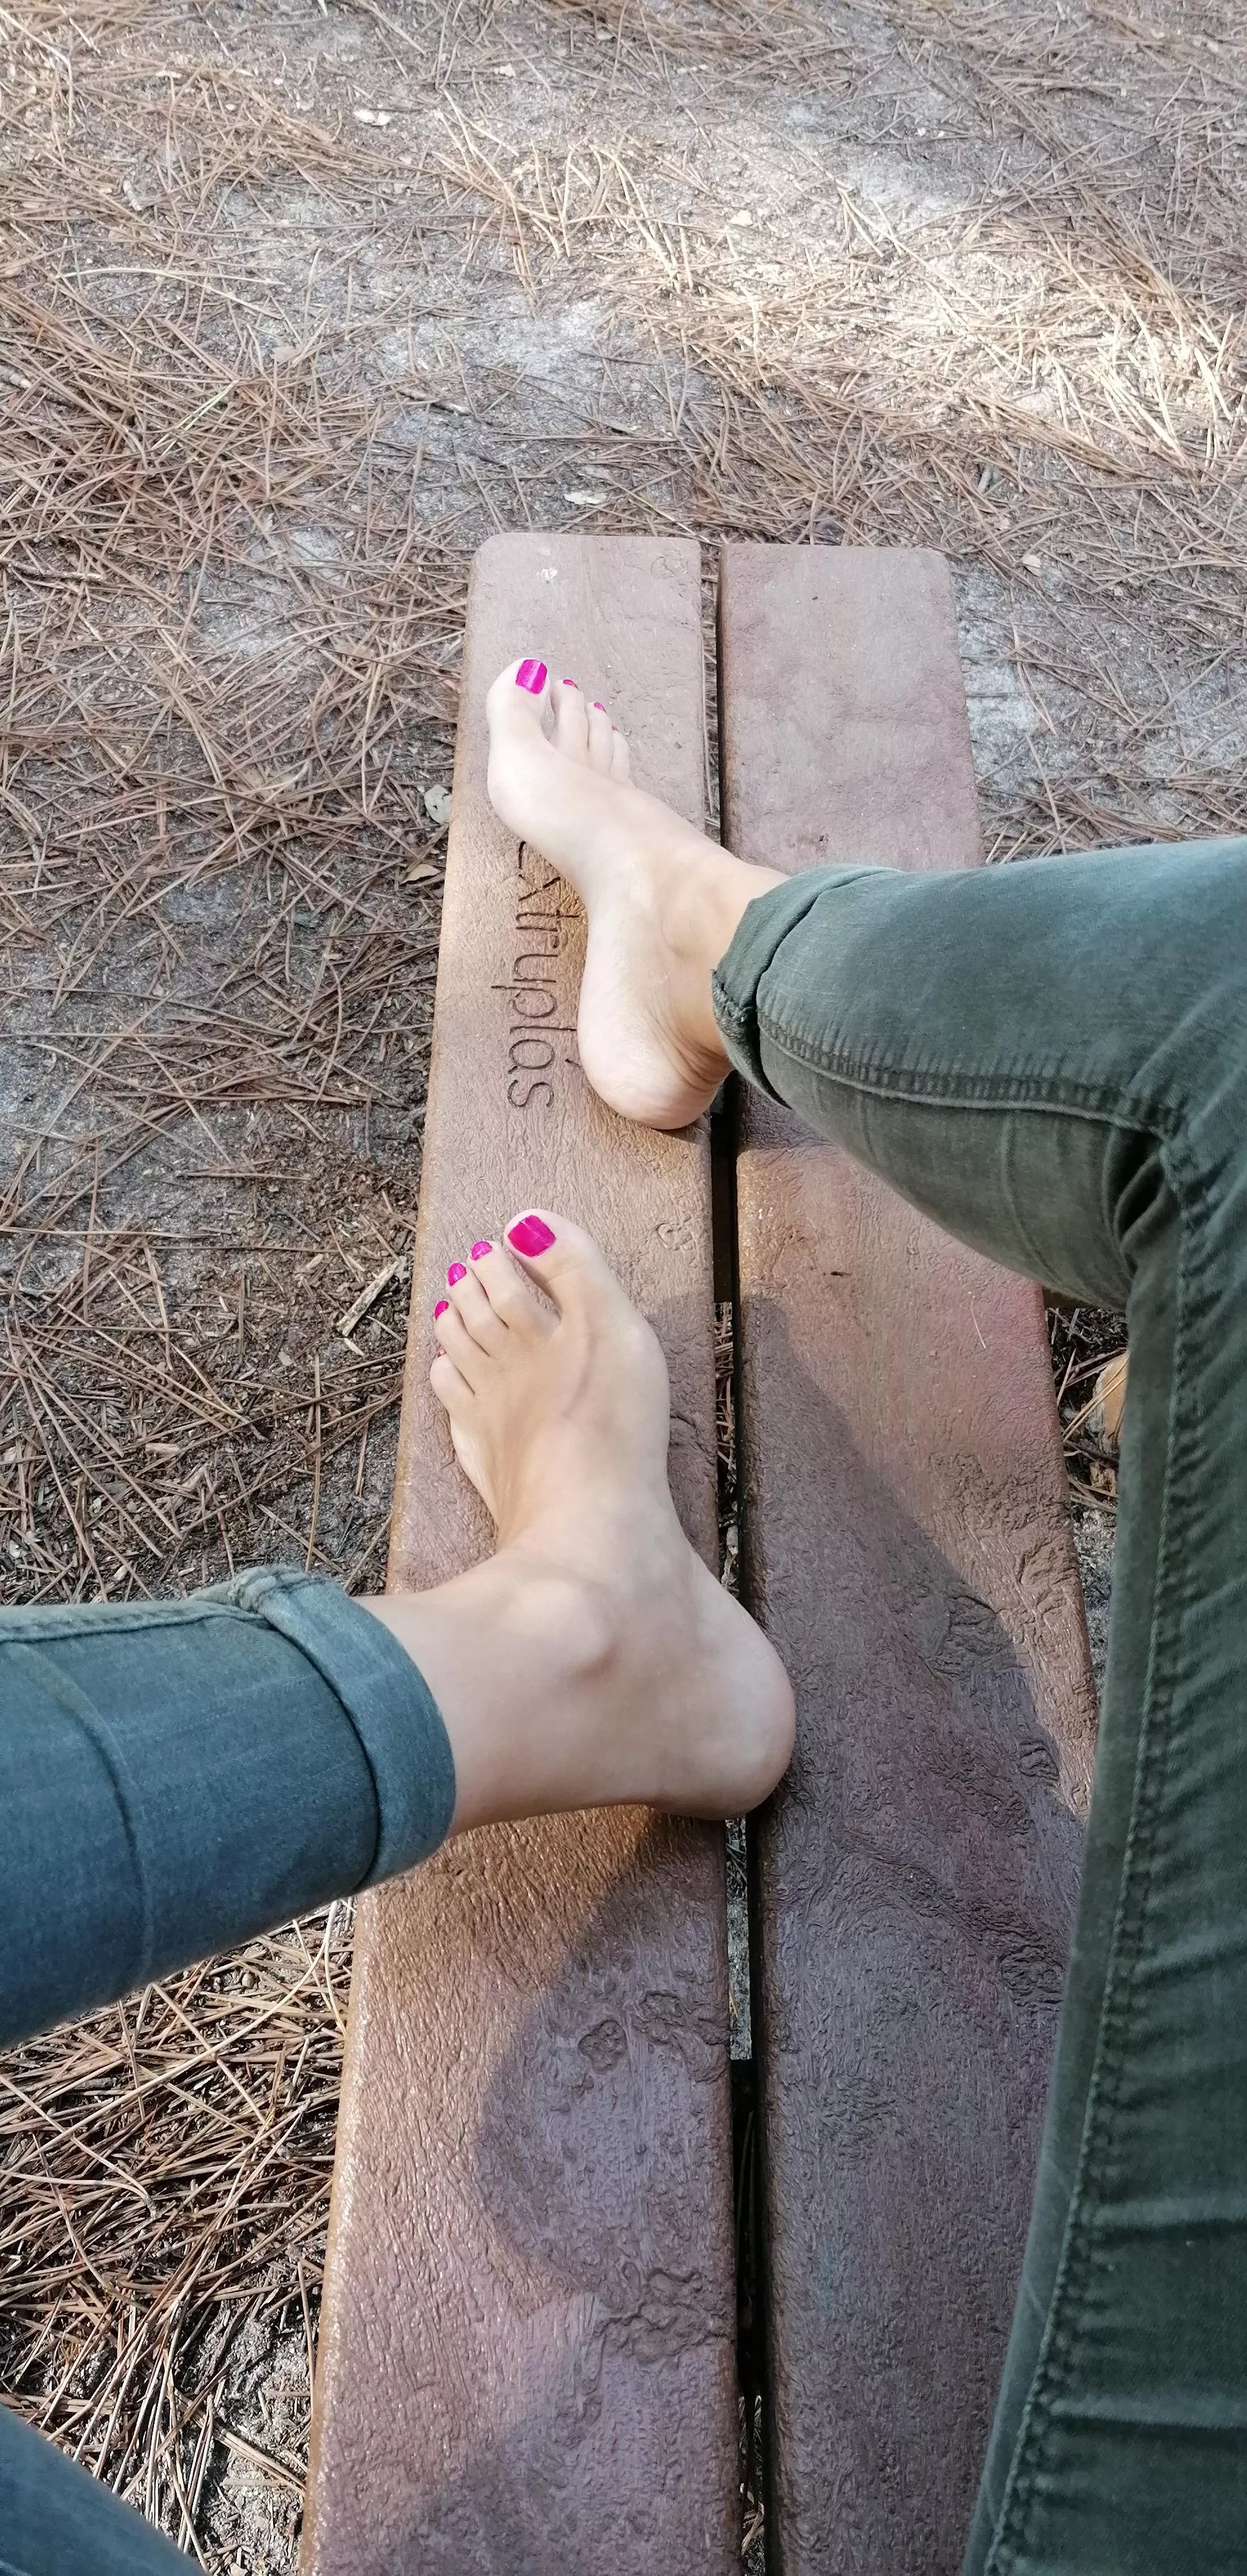 Sit here and start sucking my candy toes 😘